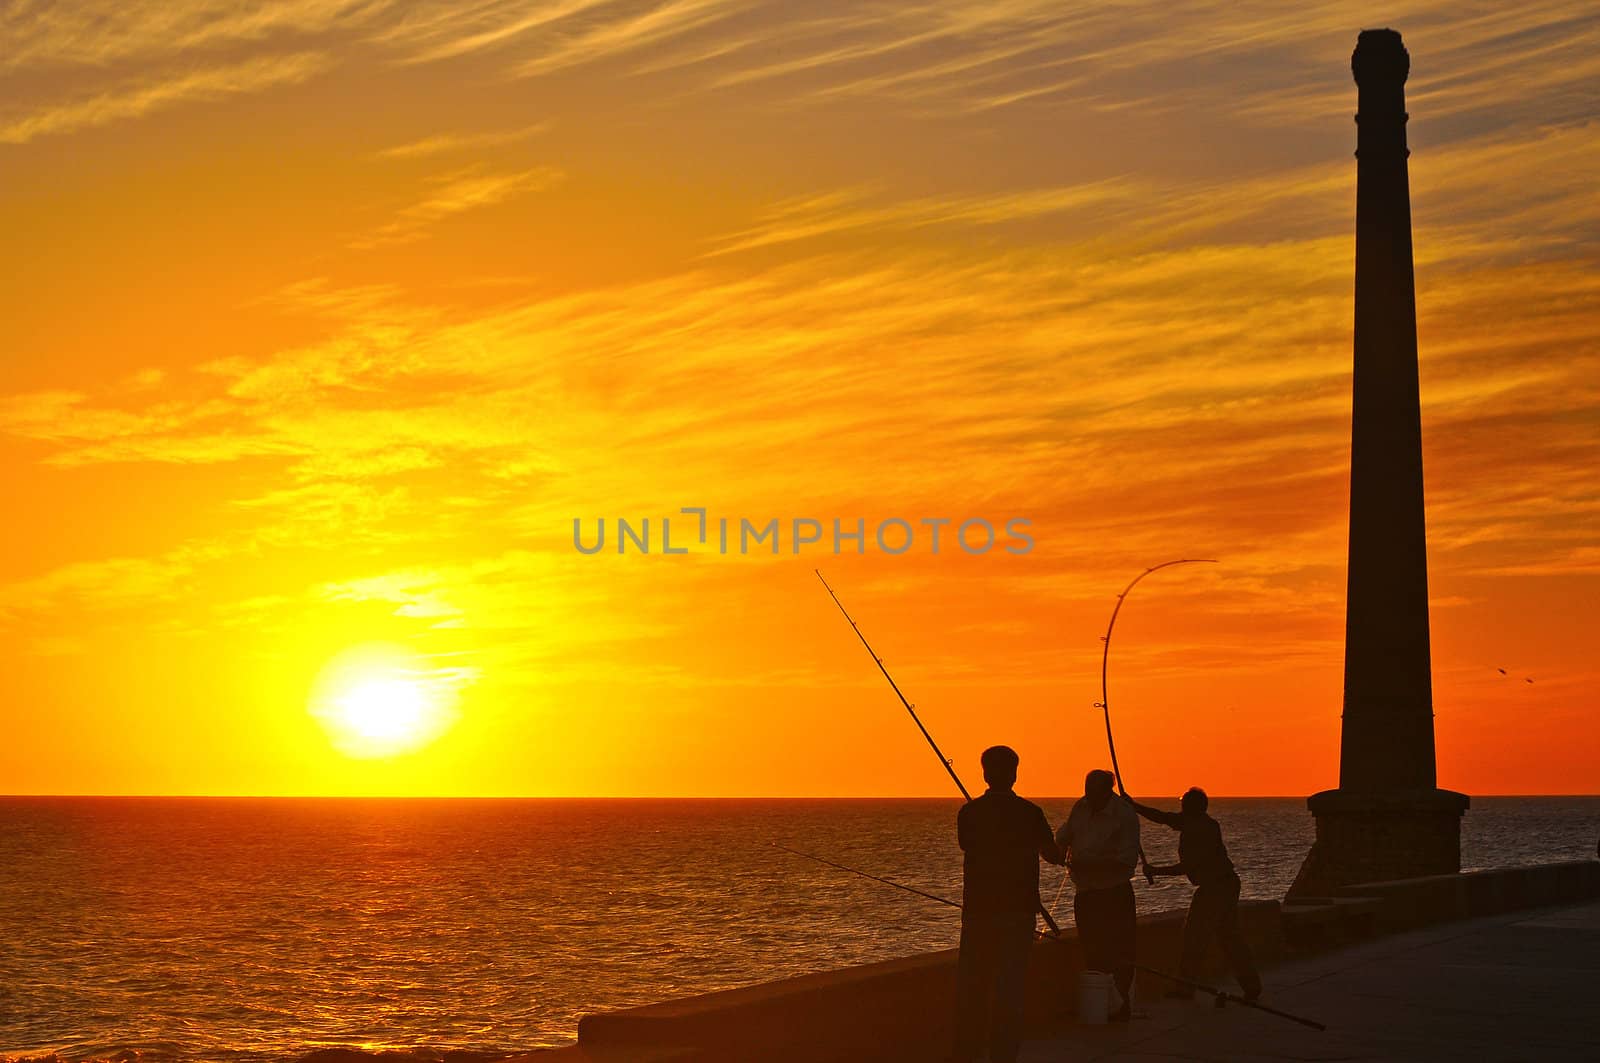 Silhouettes of three men on the coast fishing at sunset.